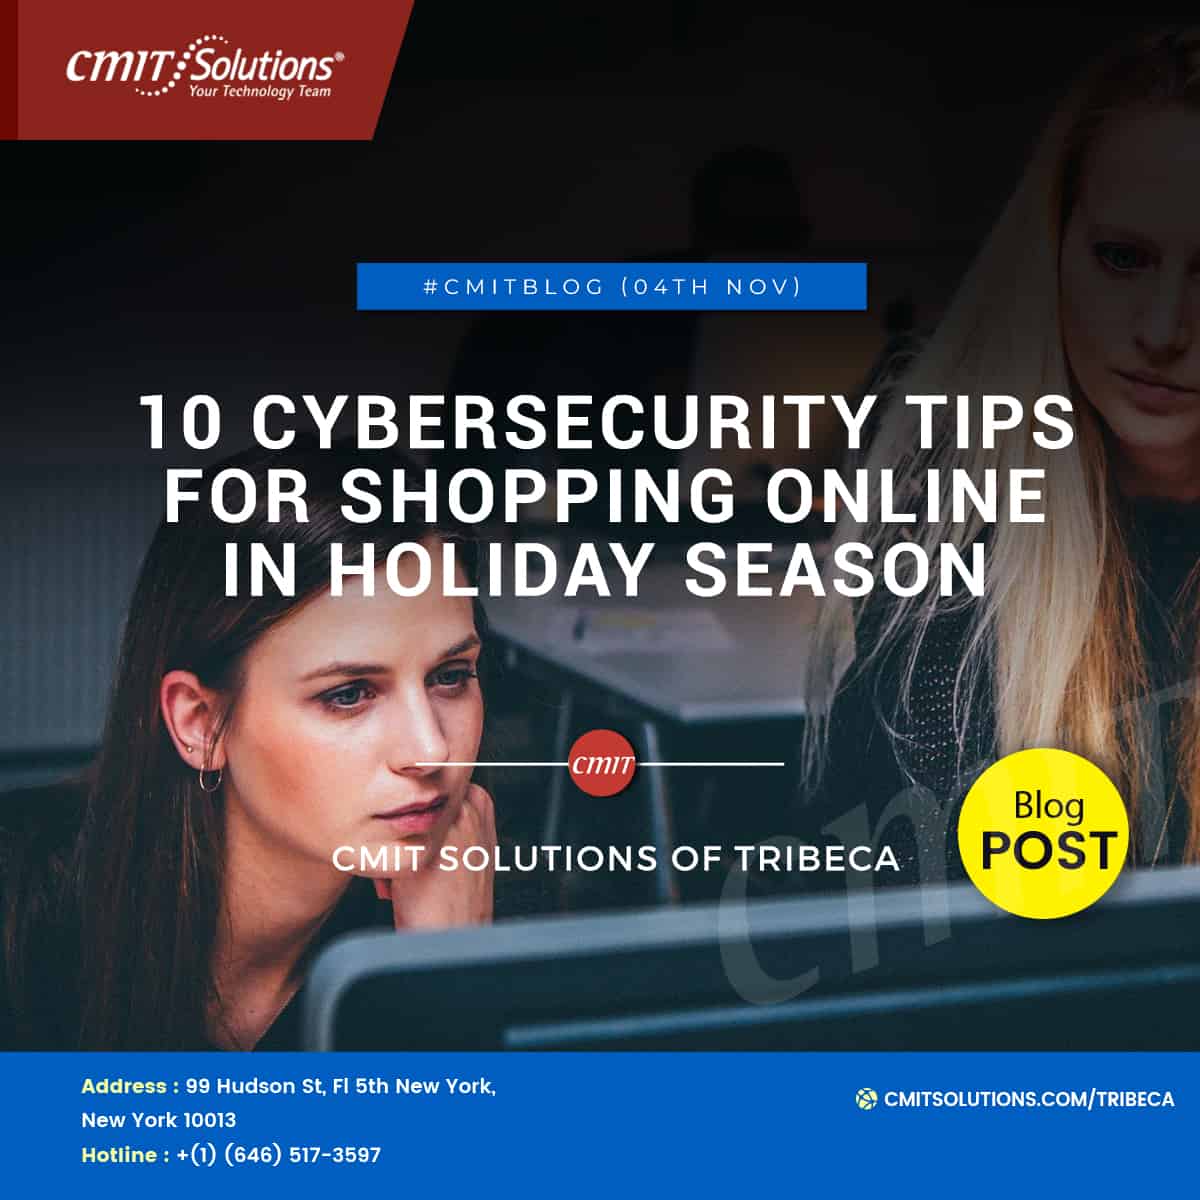 10 Cybersecurity Tips for Shopping Online in Holiday Season